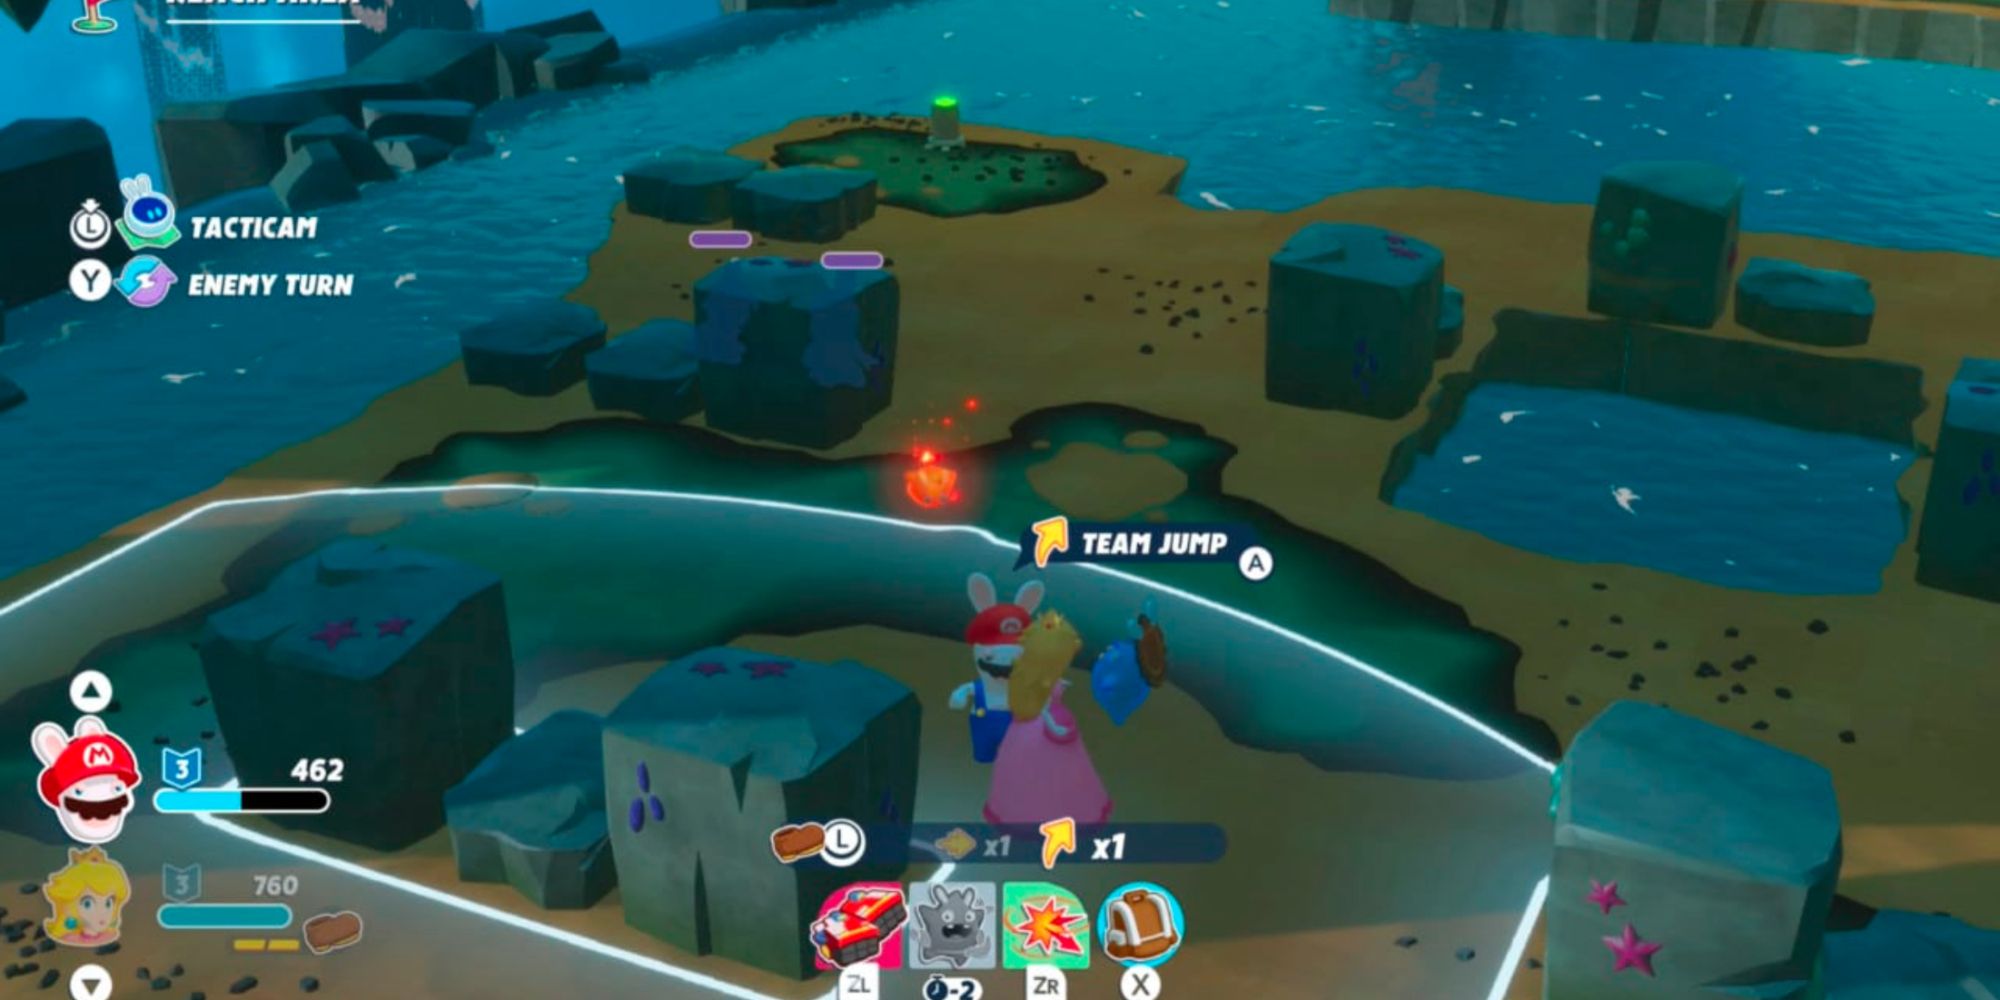 The range of a Team Jump will be displayed by a yellow circle